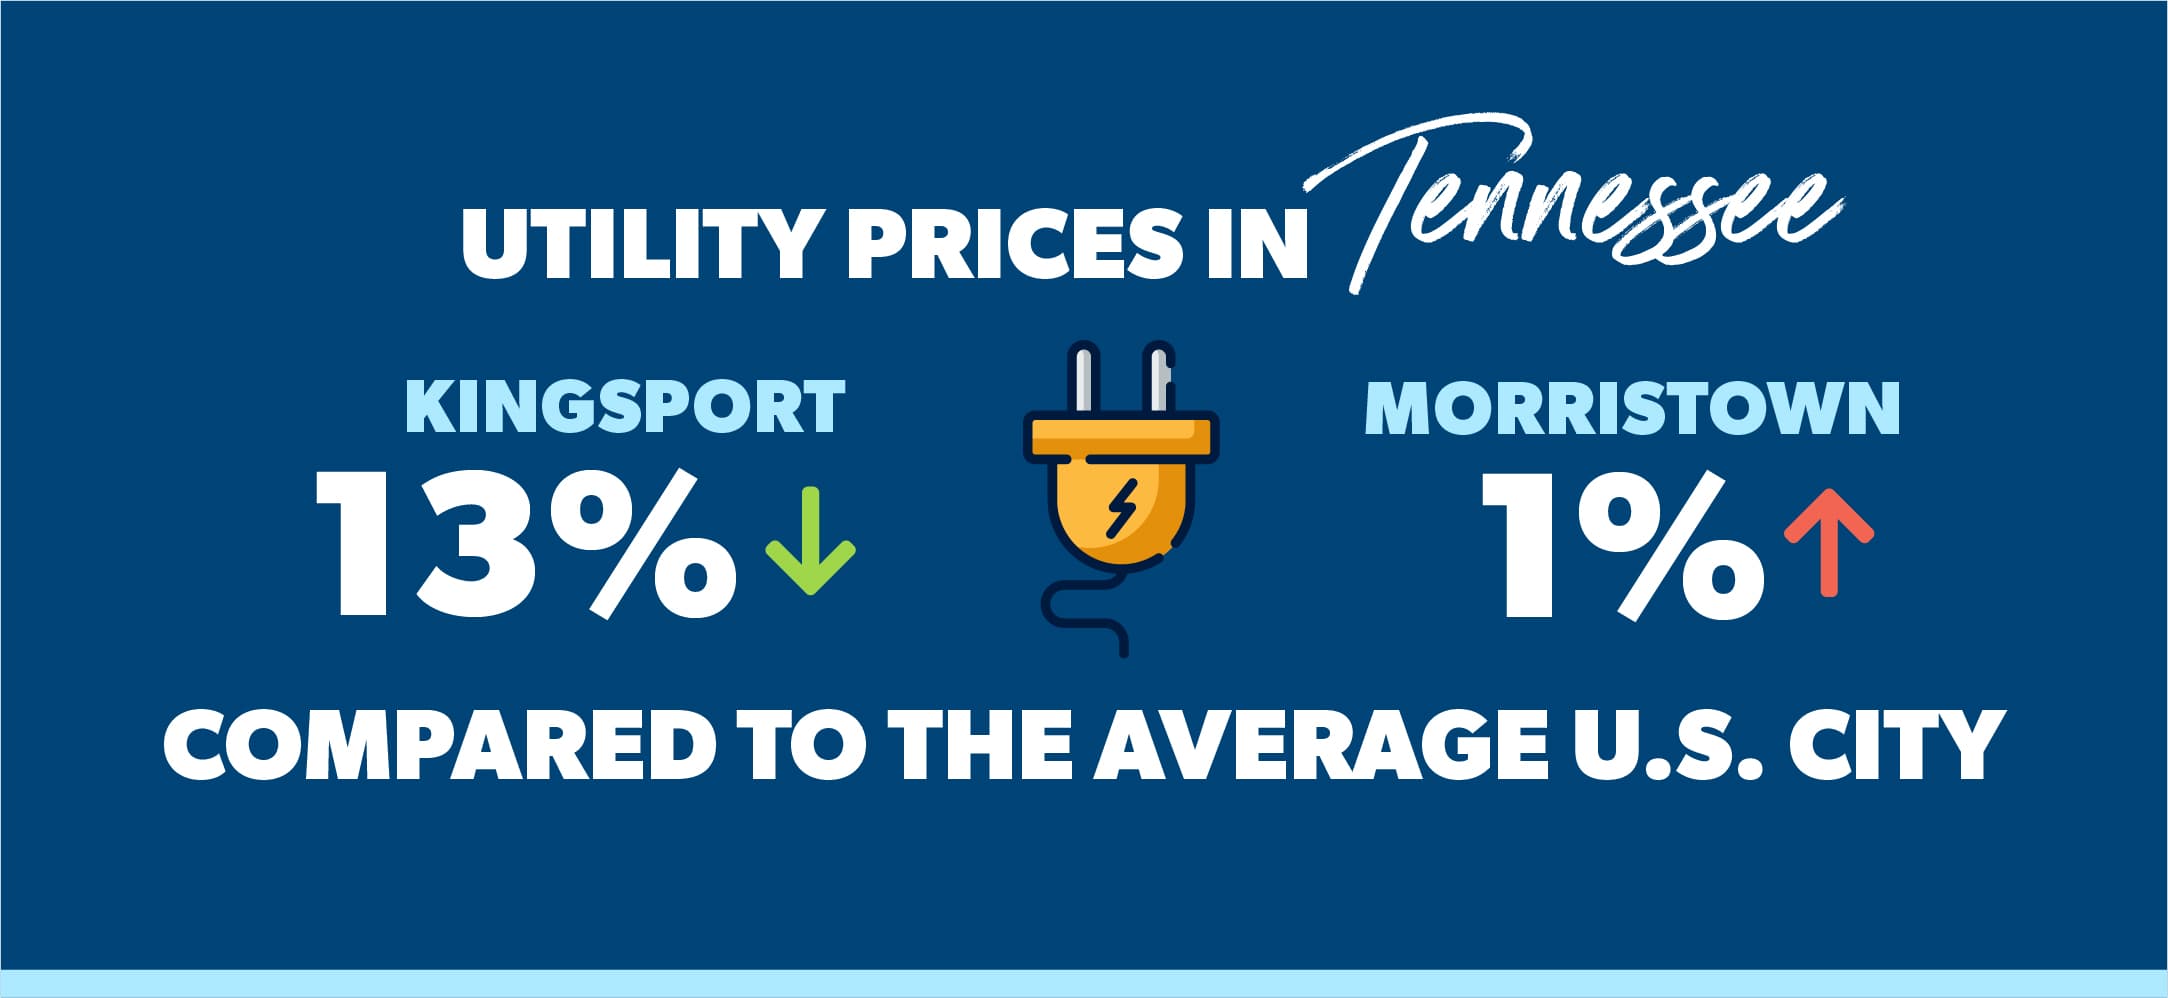 utility prices in Tennessee